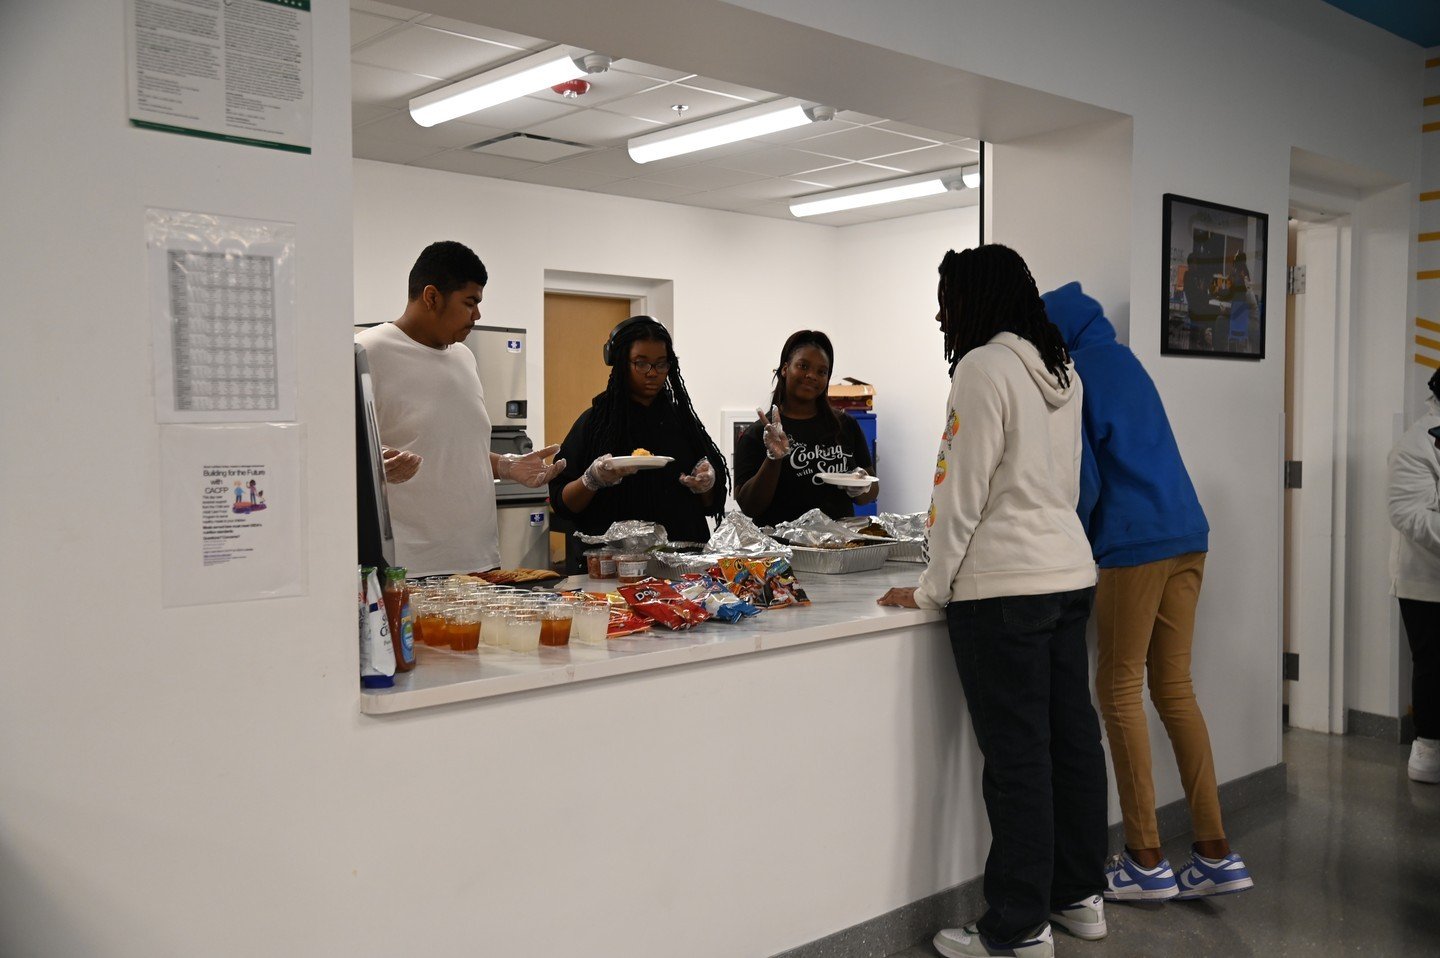 We are cooking...with Soul! Our dynamic Cooking with Soul program at the Teen &amp; Community Center is designed for youth and structured around a comprehensive curriculum. Participants engage in hands-on learning experiences, honing essential life s